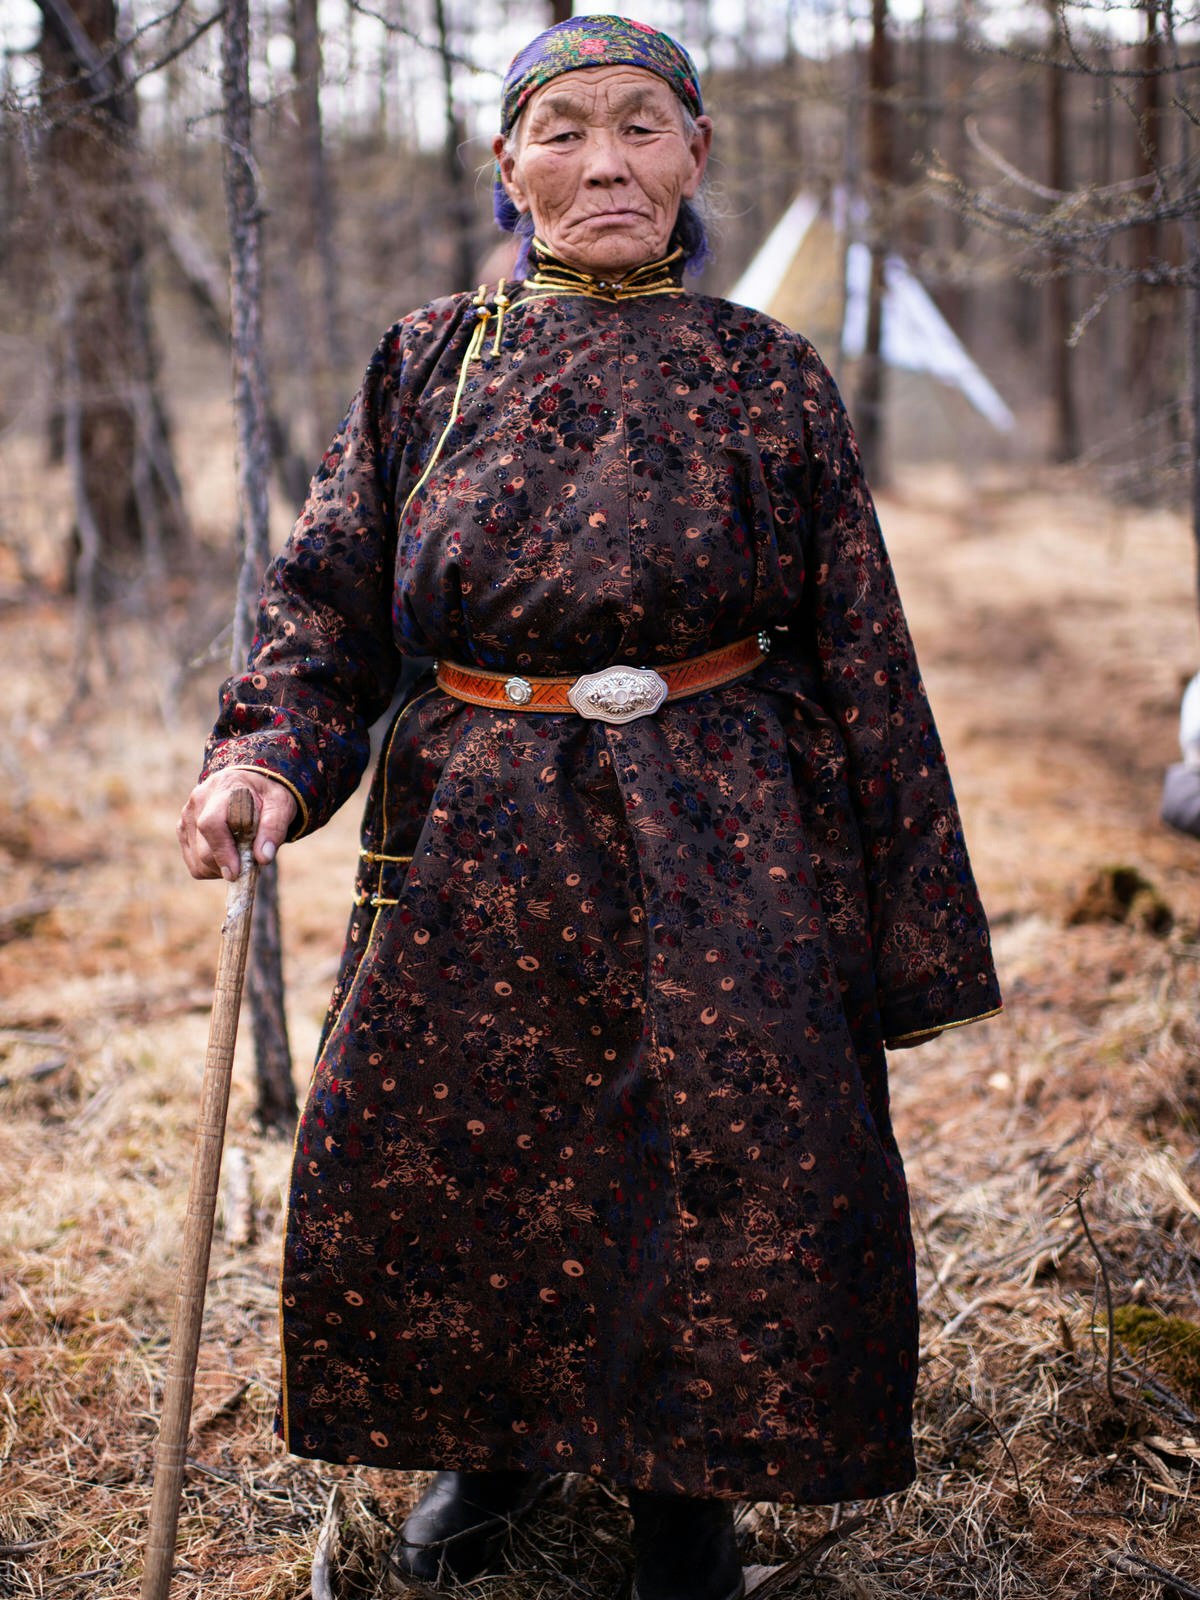 An elderly Mongolian woman in traditional dress stands in a wintry forest. Meeting a member of a local reindeer tribe in Mongolia © Chris Sheldrick